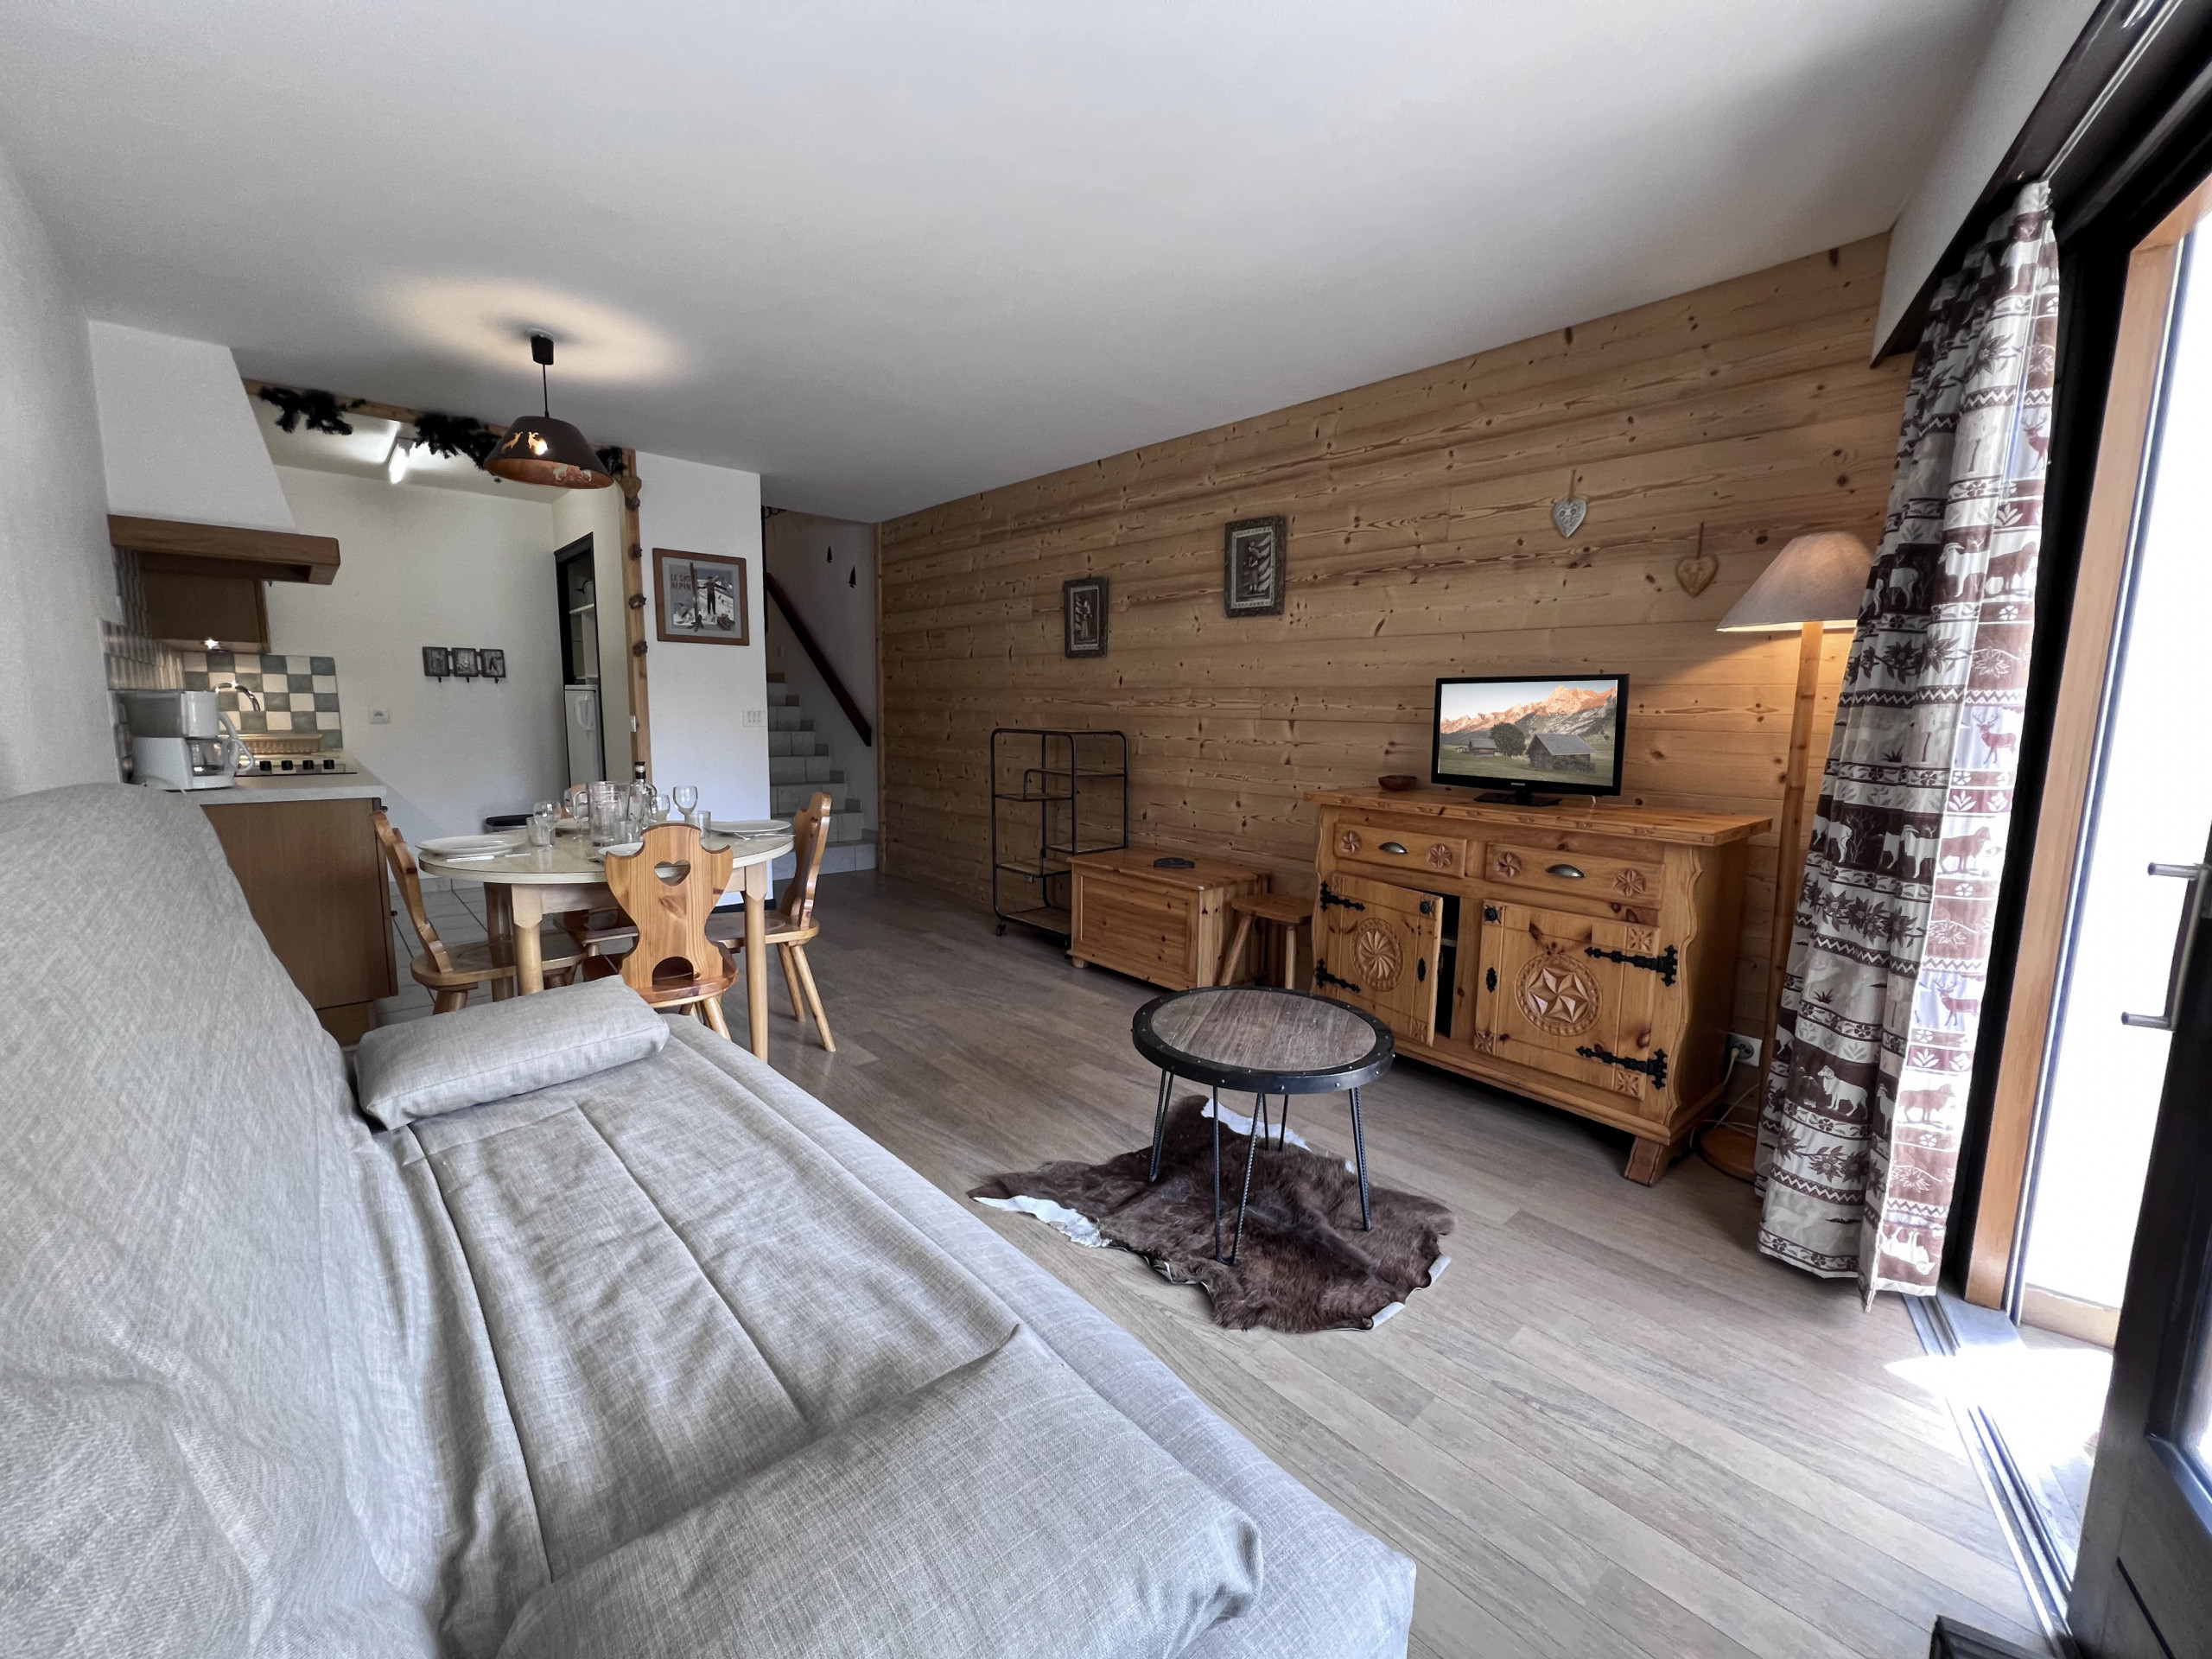  in La Clusaz - Crystal 14 - Apartment for 4 people 3* in the village 